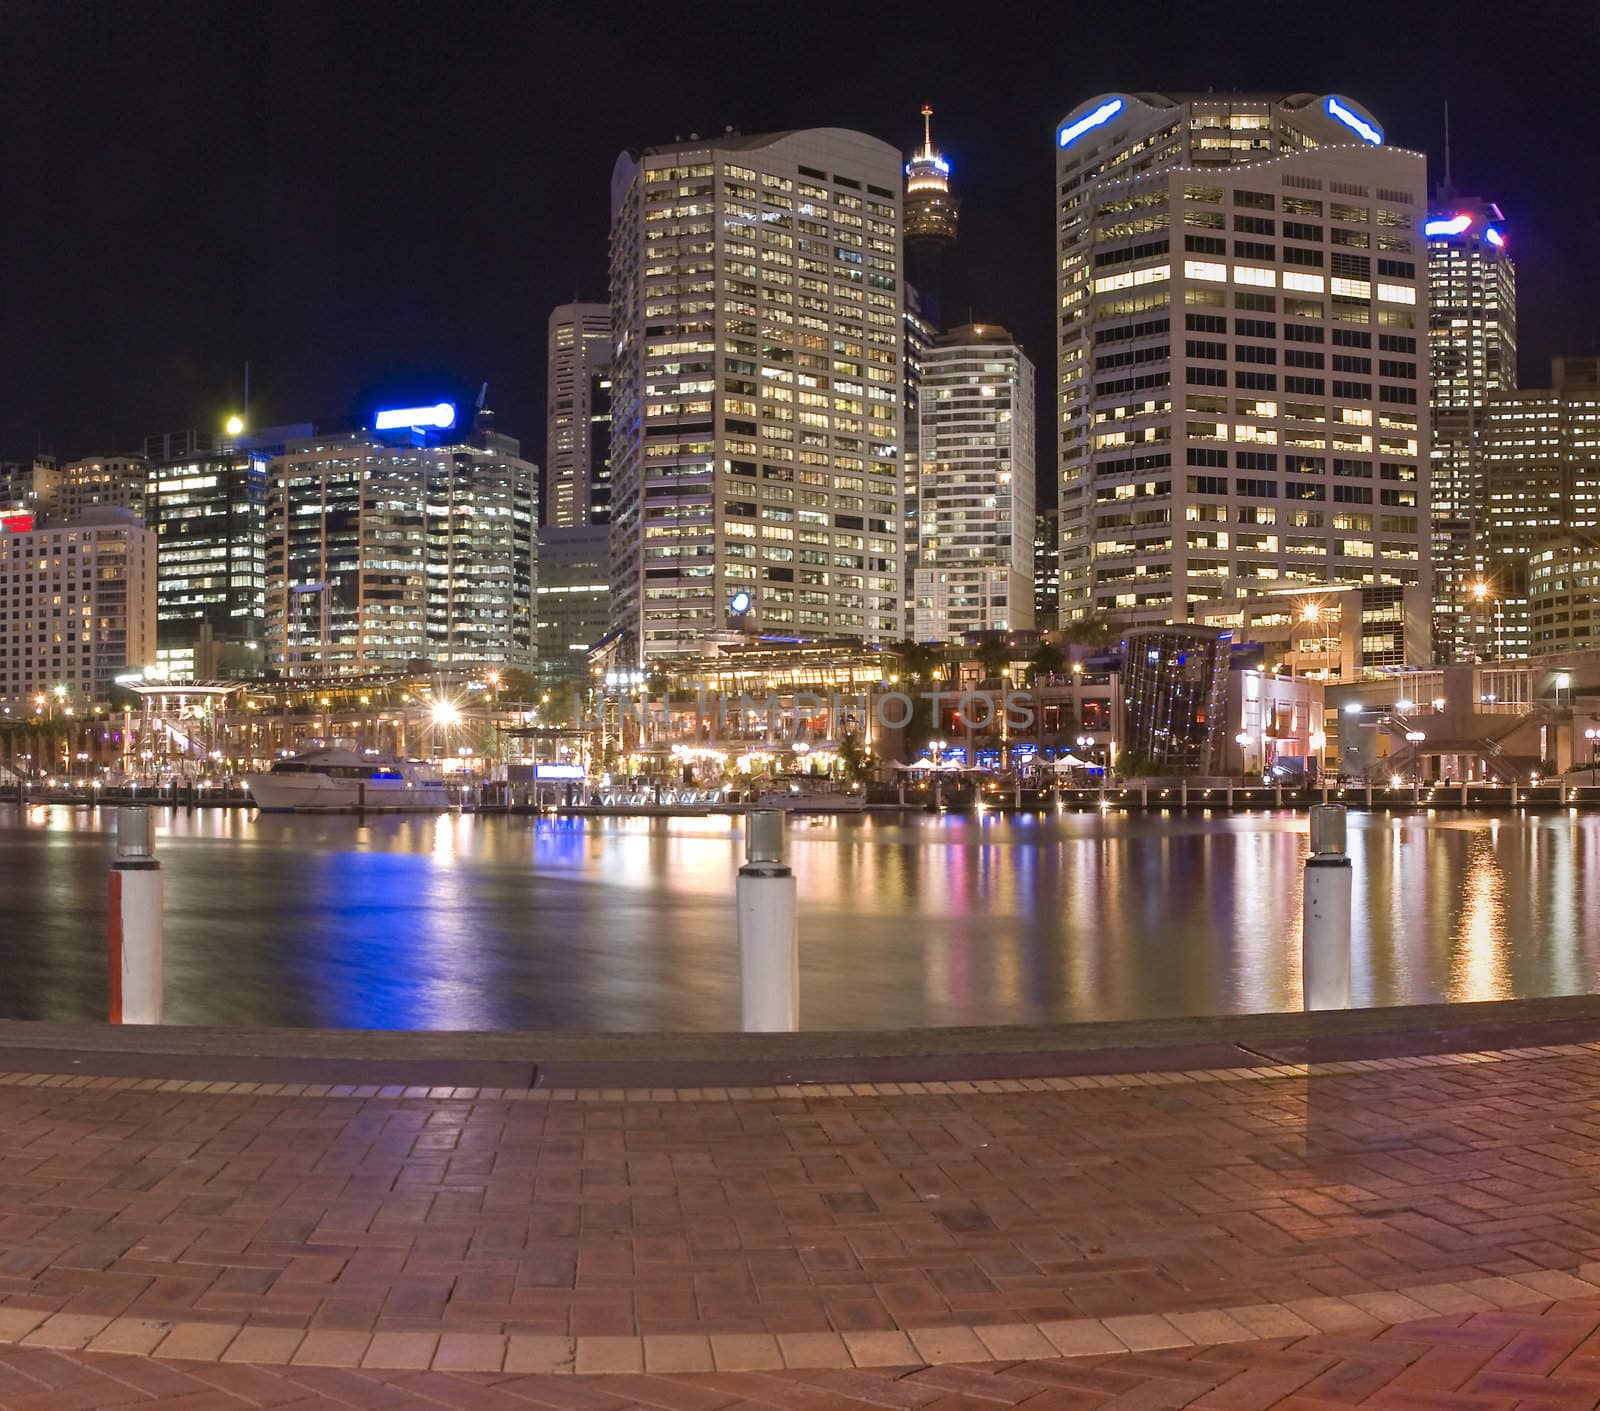 darling harbour by rorem